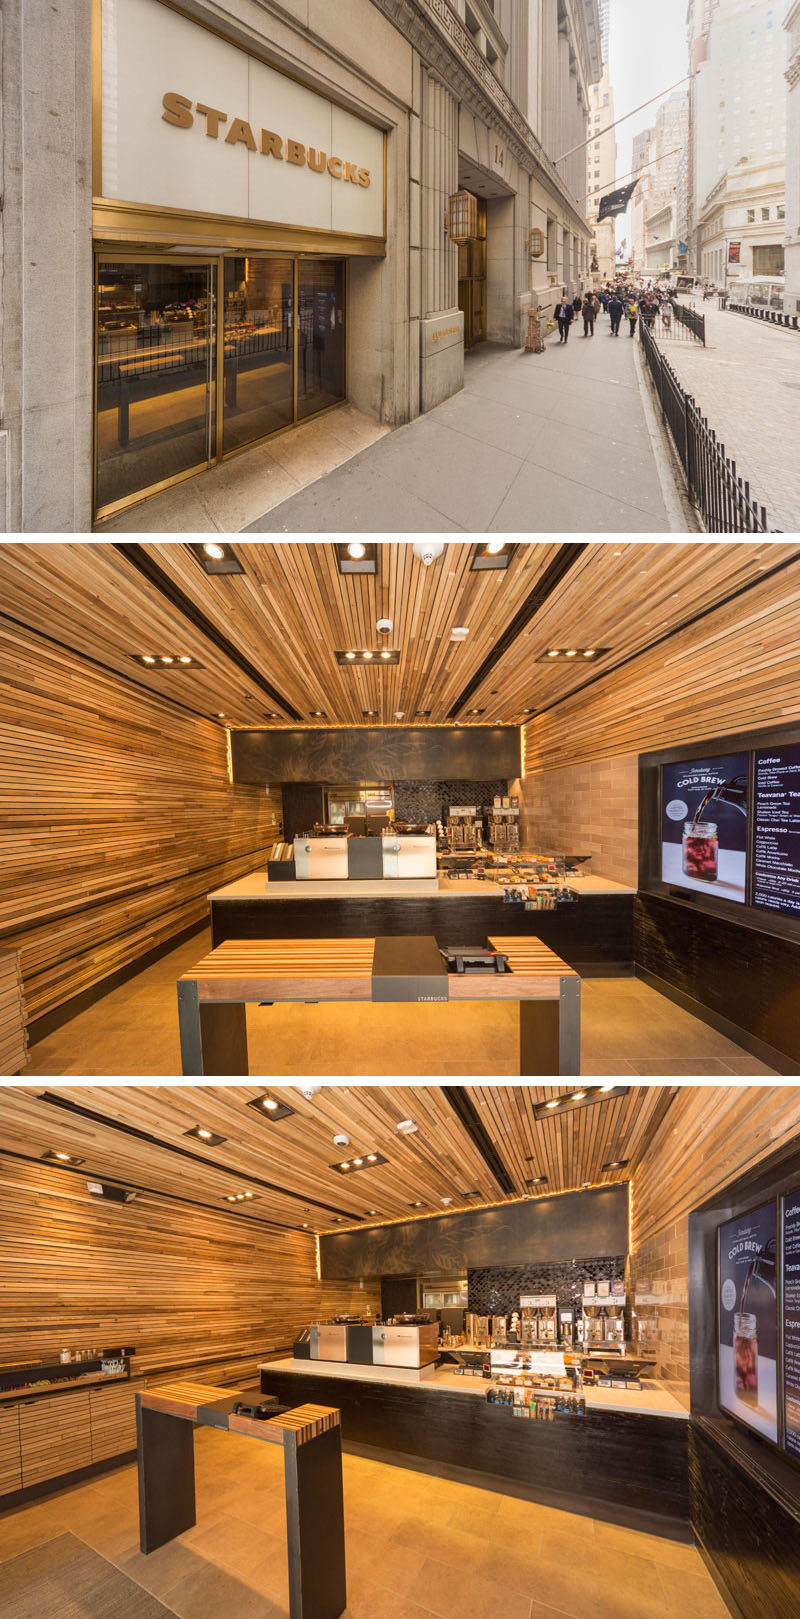 11 Starbucks Coffee Shops From Around The World // This compact Starbucks location on Wall Street in New York City, has streamlined their process to make getting your coffee and snacks that much faster while at the same time maintaining a sophisticated style suitable for it's Wall Street location. 